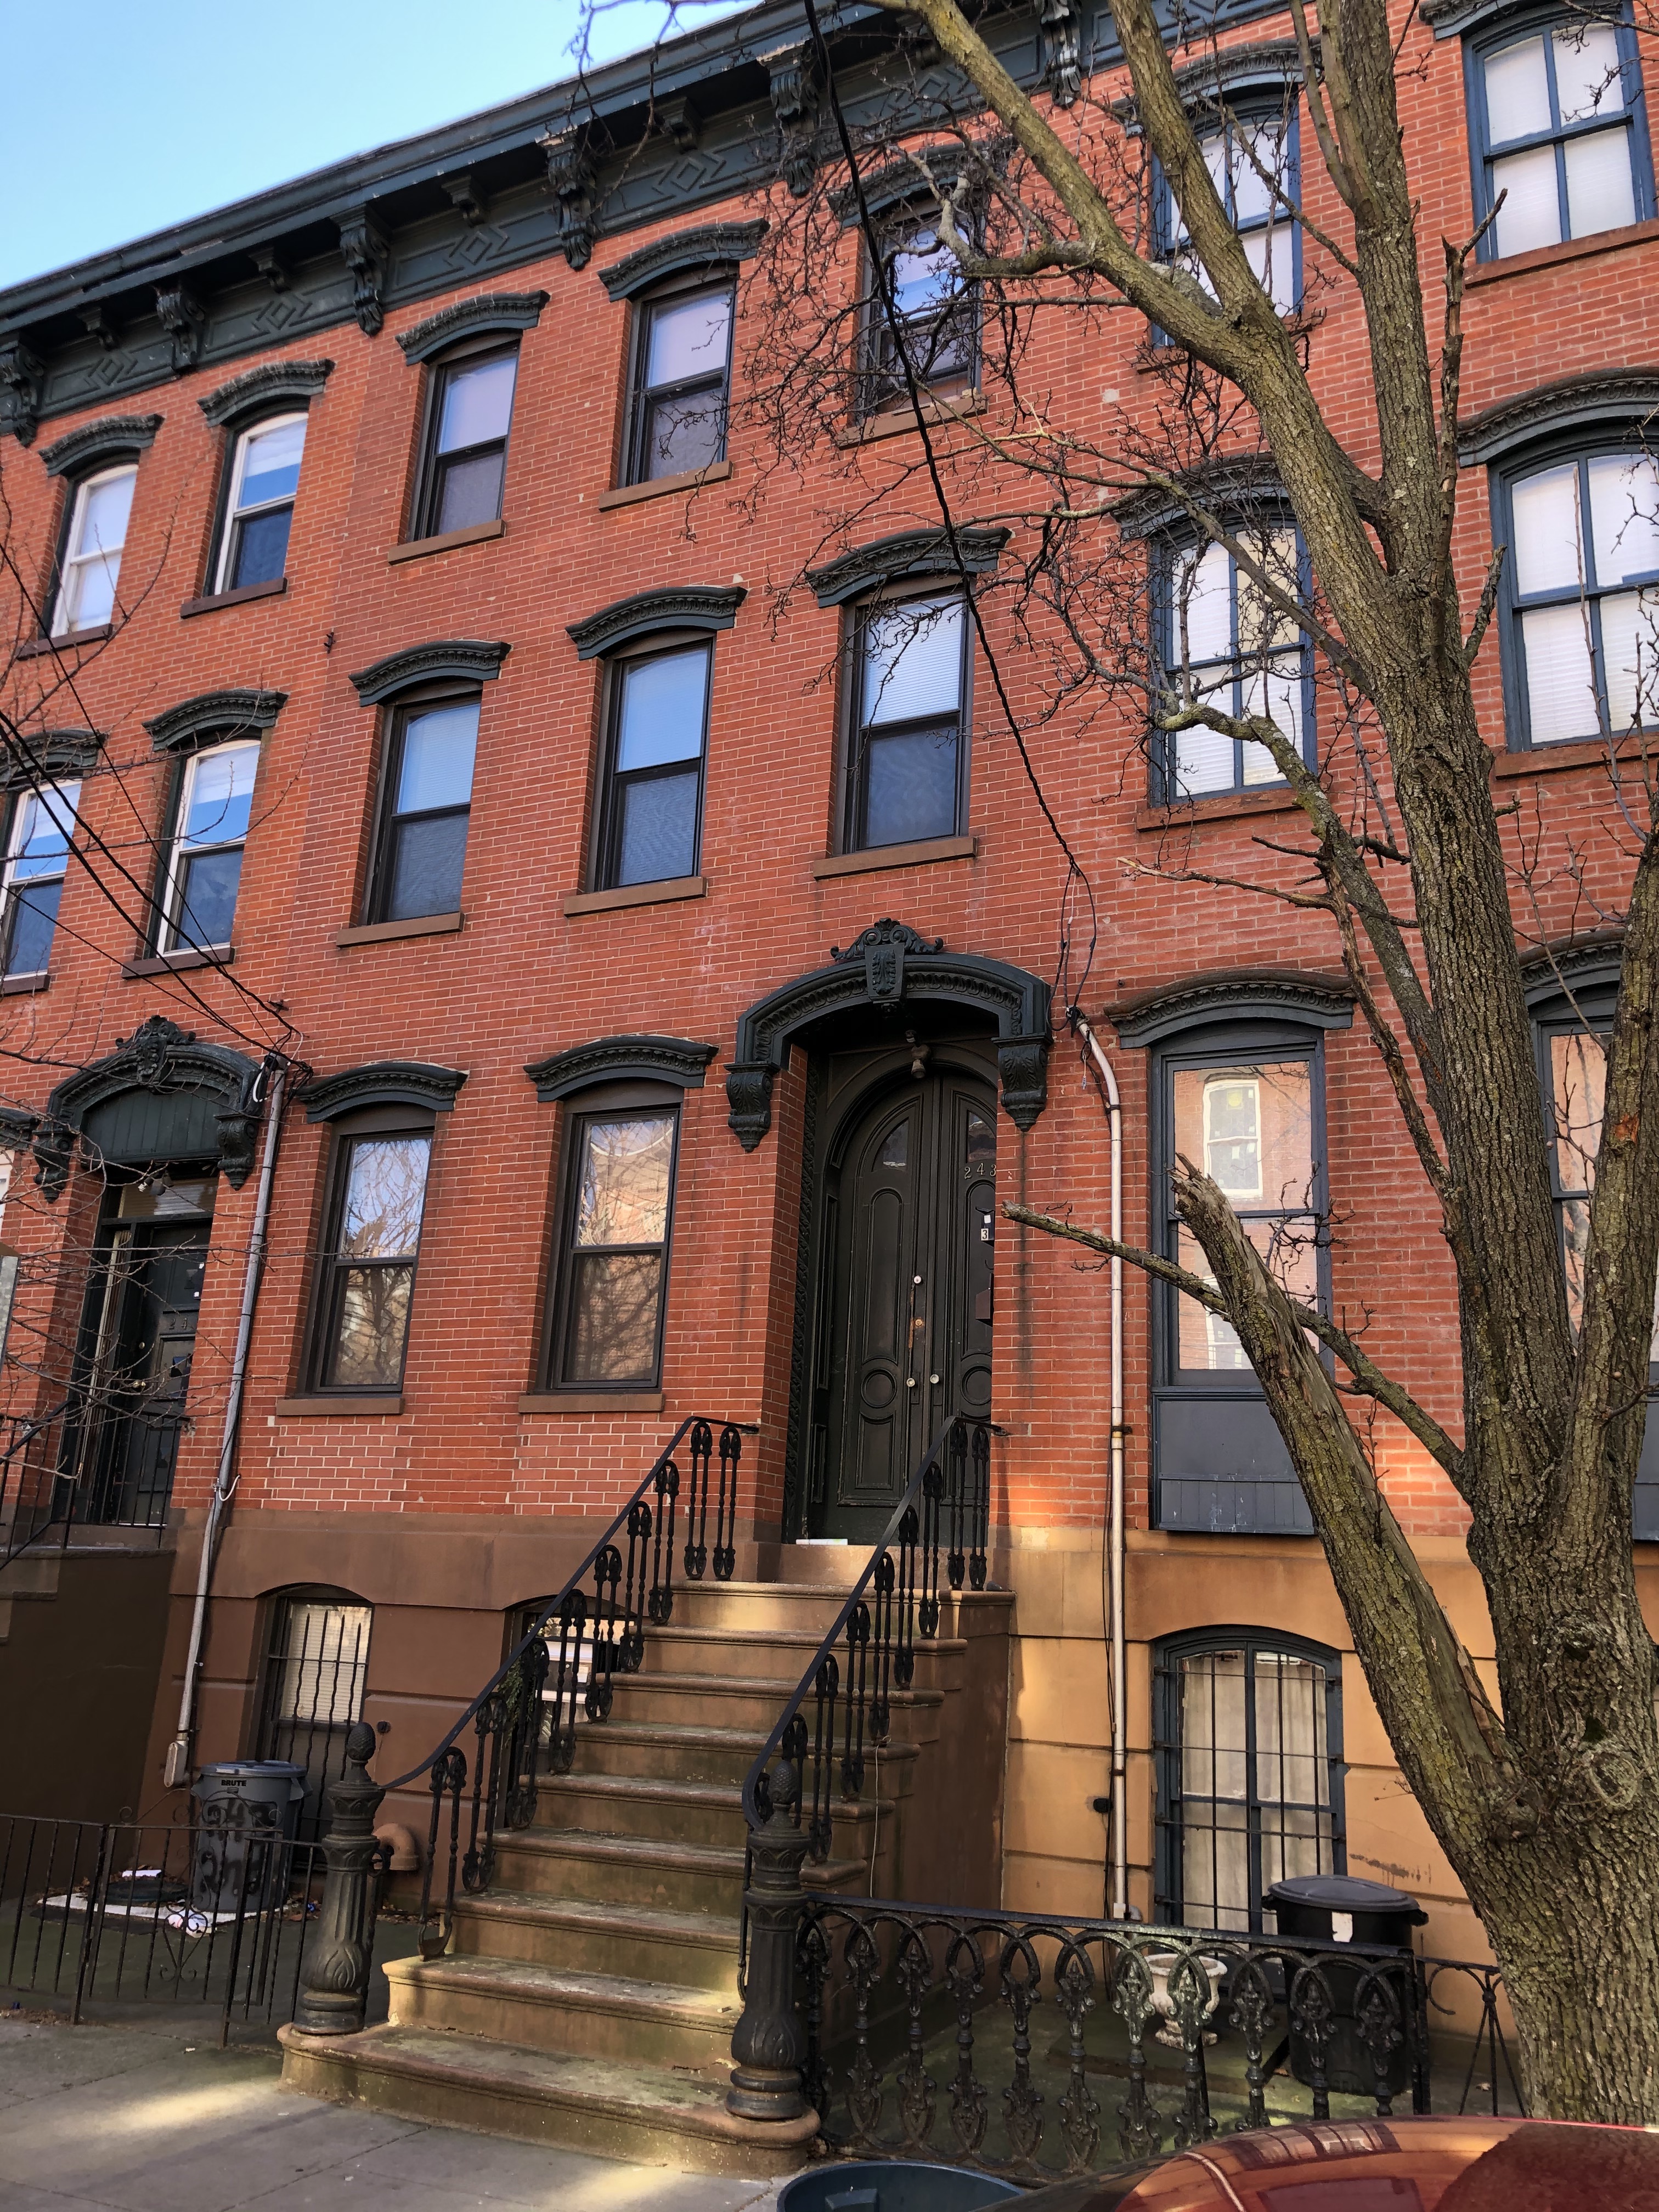 This is a super cute studio apartment in a great brownstone style row house. It is located close to the Grove St Path and all the great restaurants, bars and vibrancy that makes Downtown Jersey City so attractive.  Hurry up!  Available Feb 15th.  No pets.  Tenant pays utilities. 